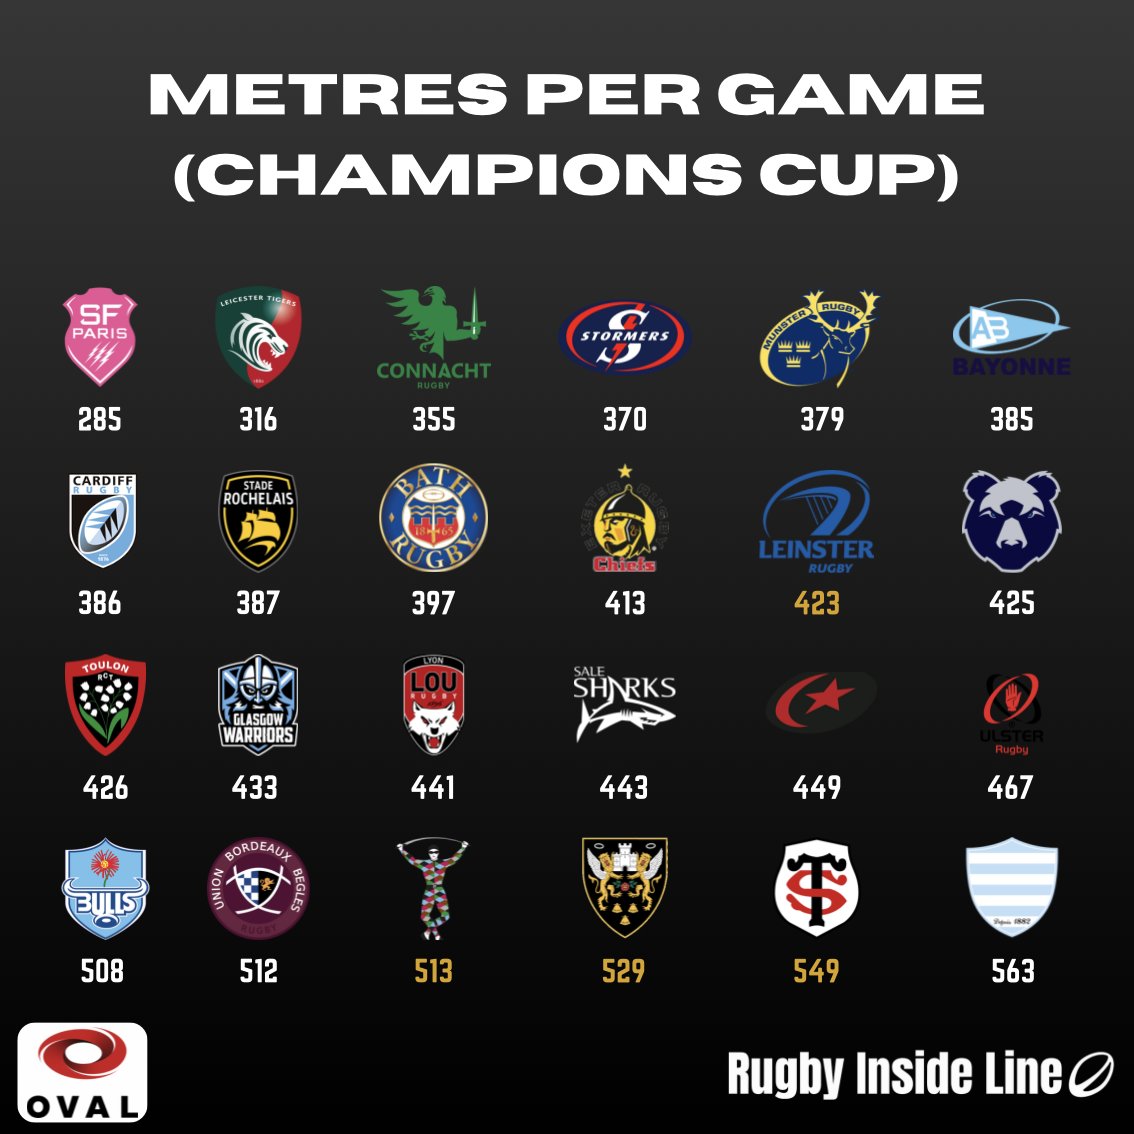 ⭐️ METRES PER GAME The Champions Cup semi finals are approaching. Toulouse, Northampton & Harlequins are all in the top four for metres per game. Meanwhile Leinster are 14th for the competition. It looks to be a useful gauge for the top performers. Powered by @Oval_Insights